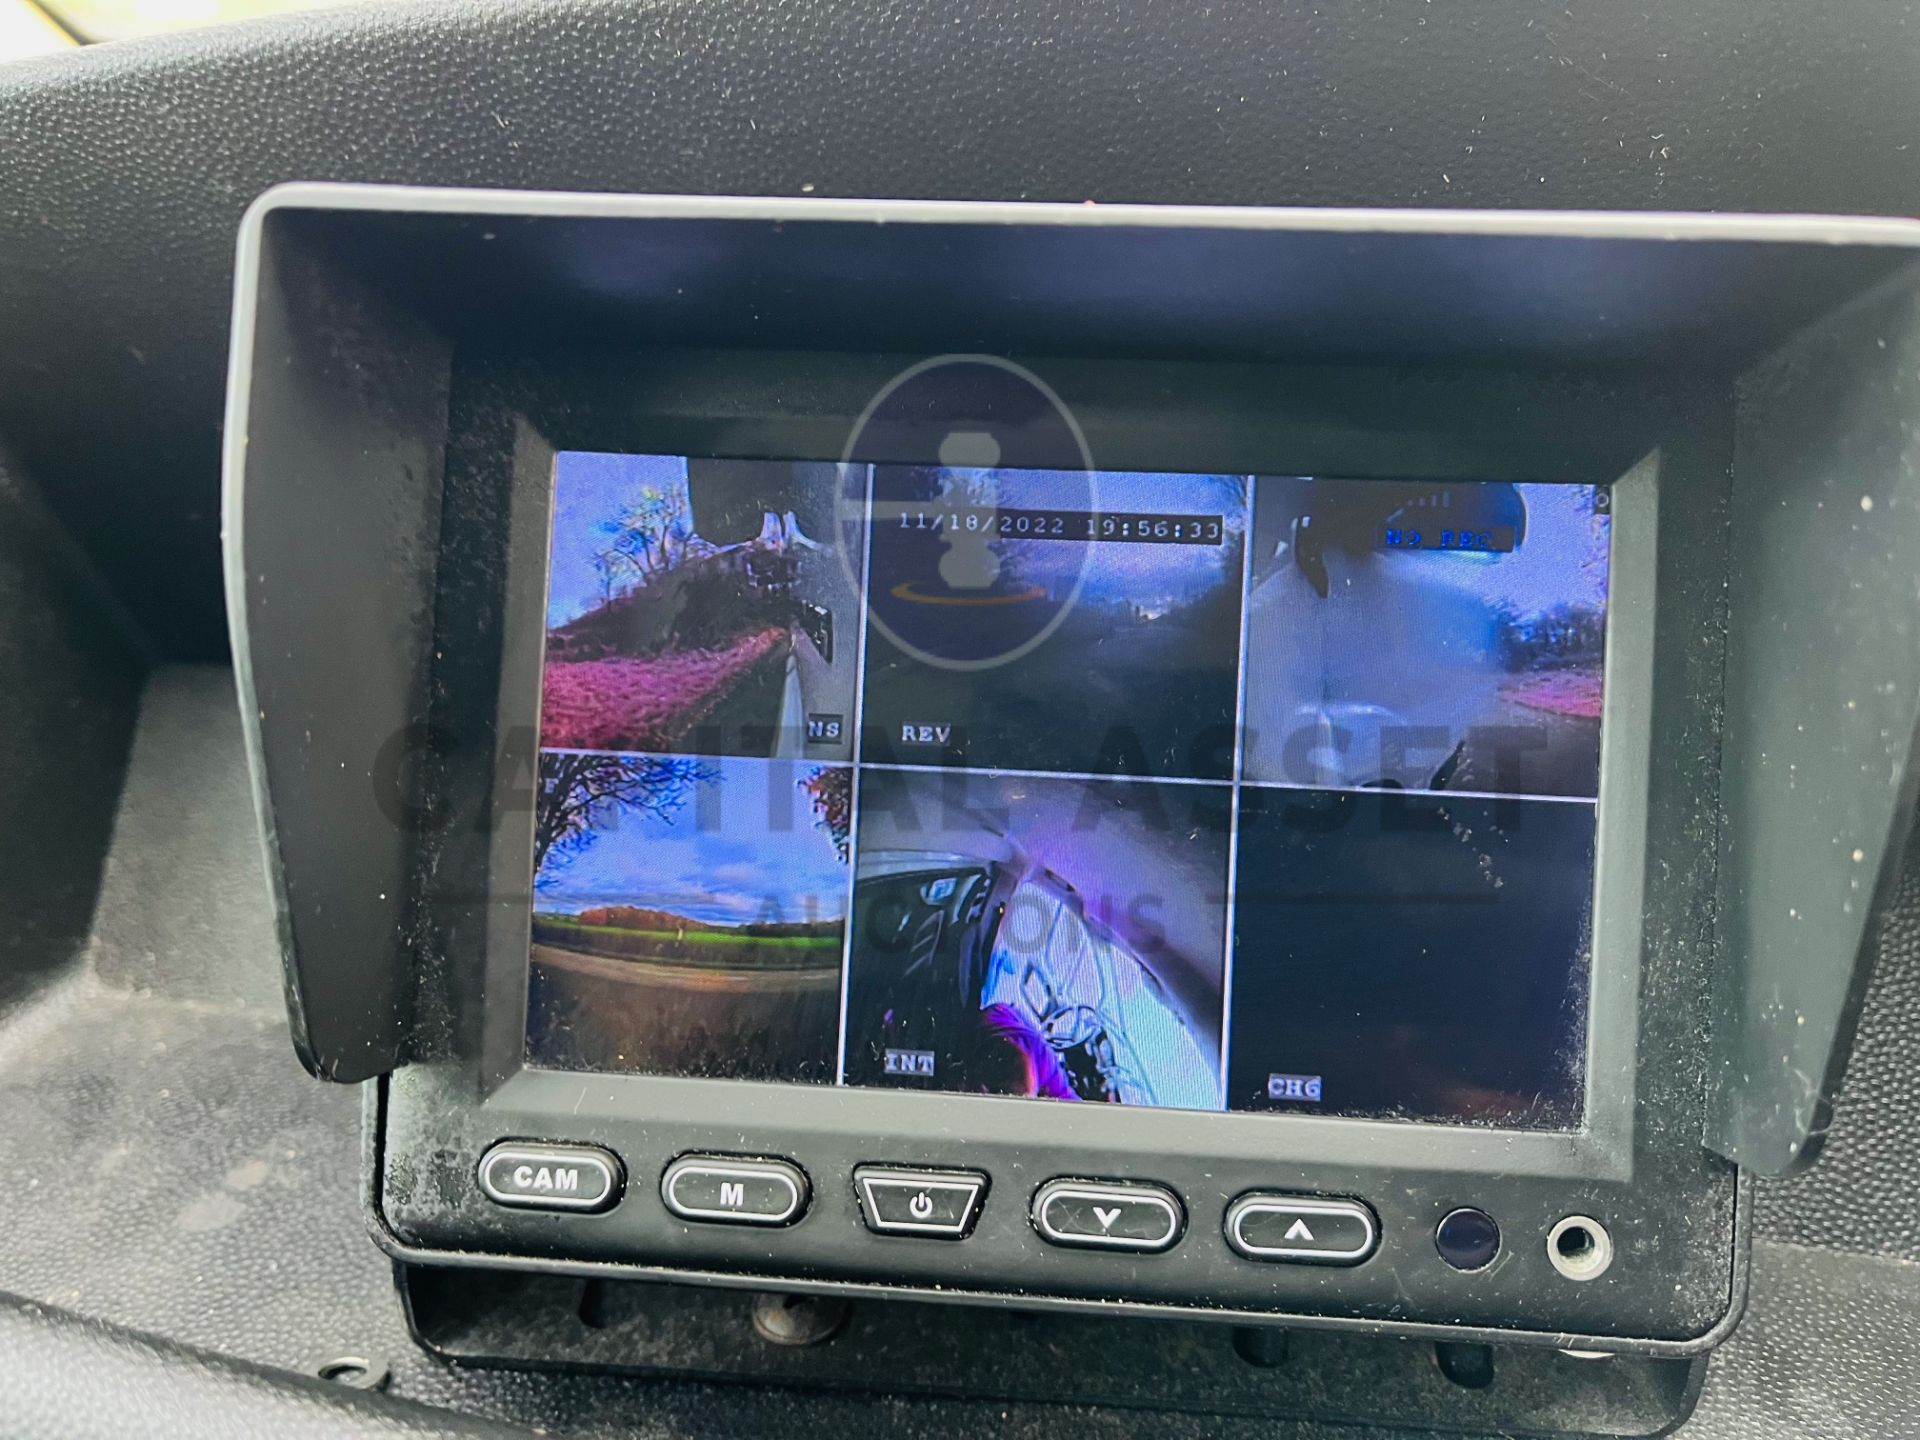 (ON SALE) FIAT DUCATO 2.3 MULTIJET (2019 MODEL) RARE CURTAIN SIDE BODY - 1 OWNER - 360 CAMERA VIEW - Image 20 of 24